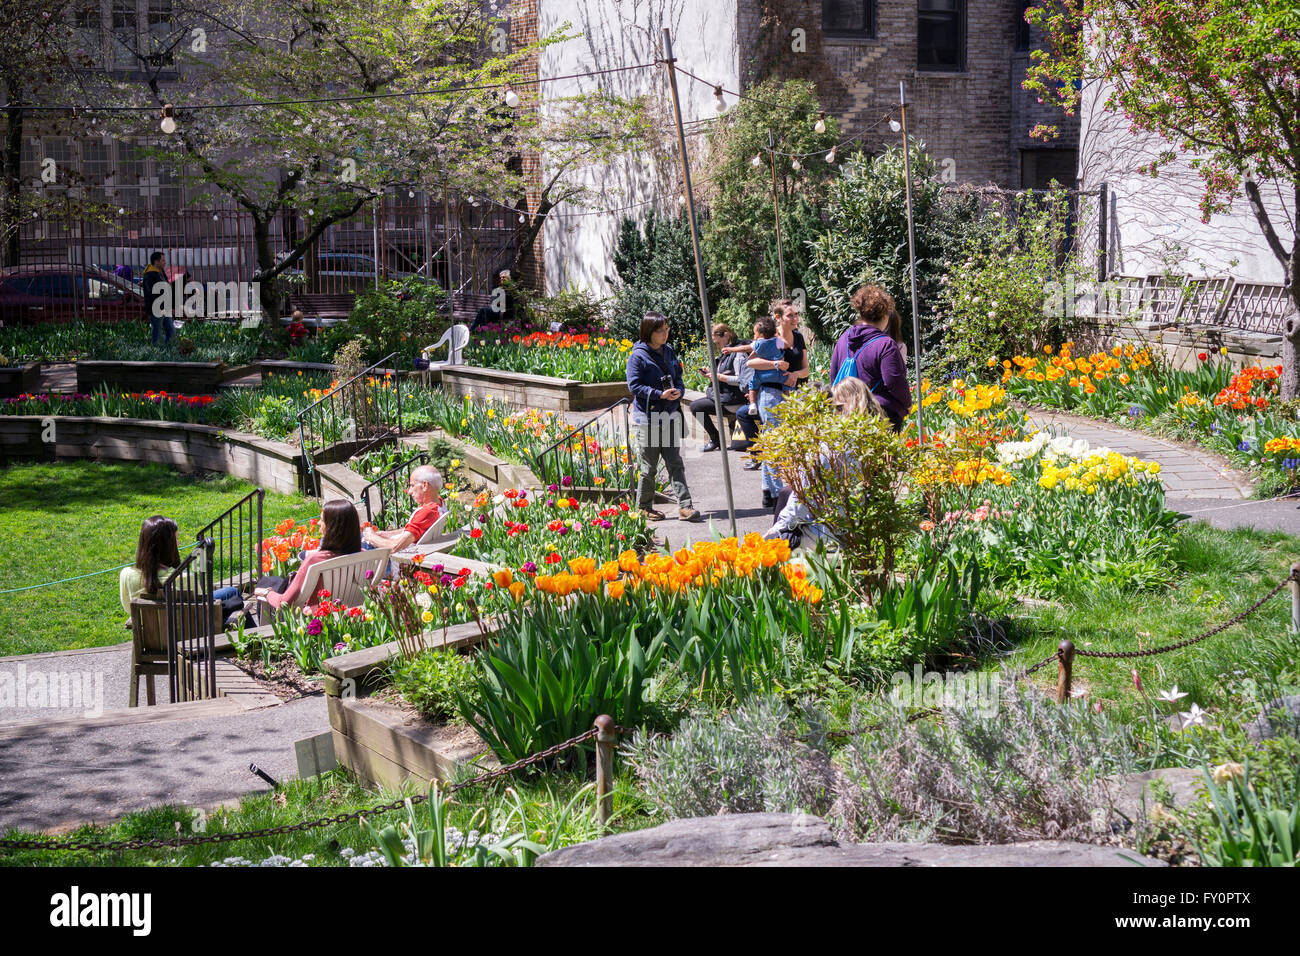 visitors to the west side community garden in new york enjoy the